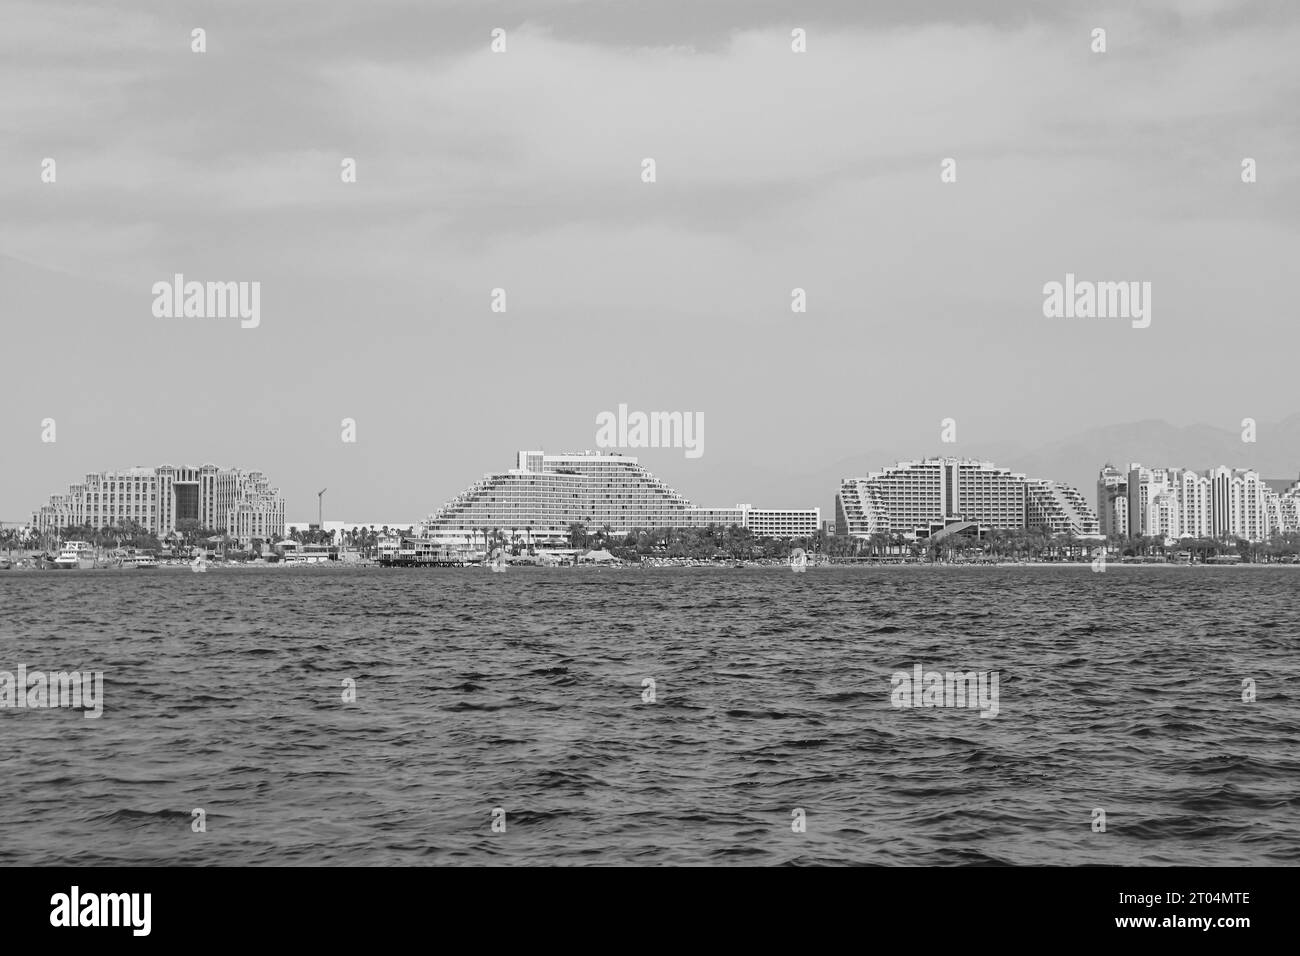 Boat view of Eilat harbour boardwalk luxury hotel resorts. (left to right) Queen Of Sheba, Royal Beach, Dan Eilat, Herods Palace in black and white Stock Photo